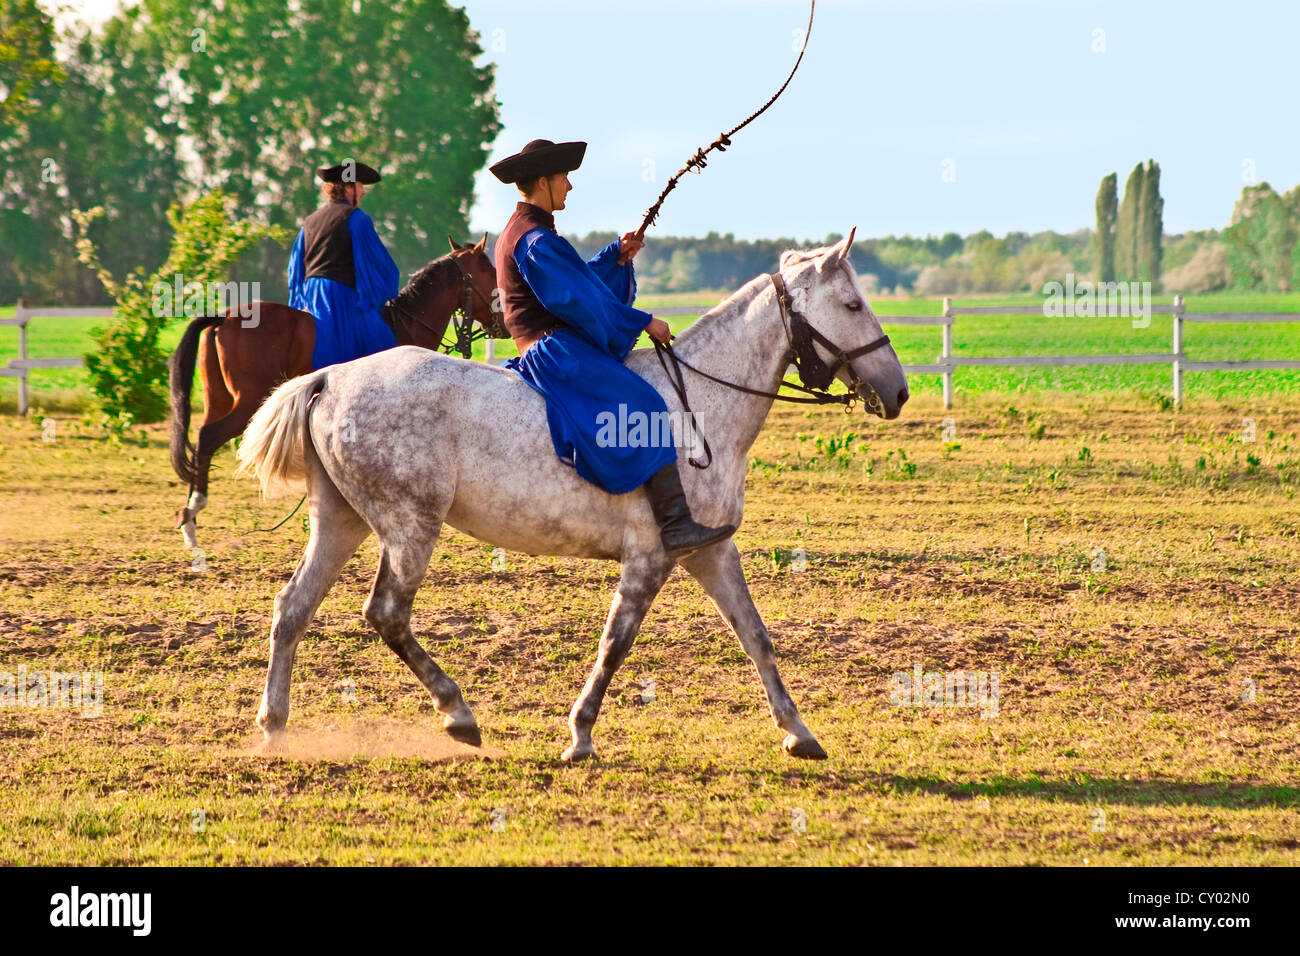 Hungary, Kalocsa, Csikos Hungarian horse riders, demonstrating their prowess with a whip Stock Photo